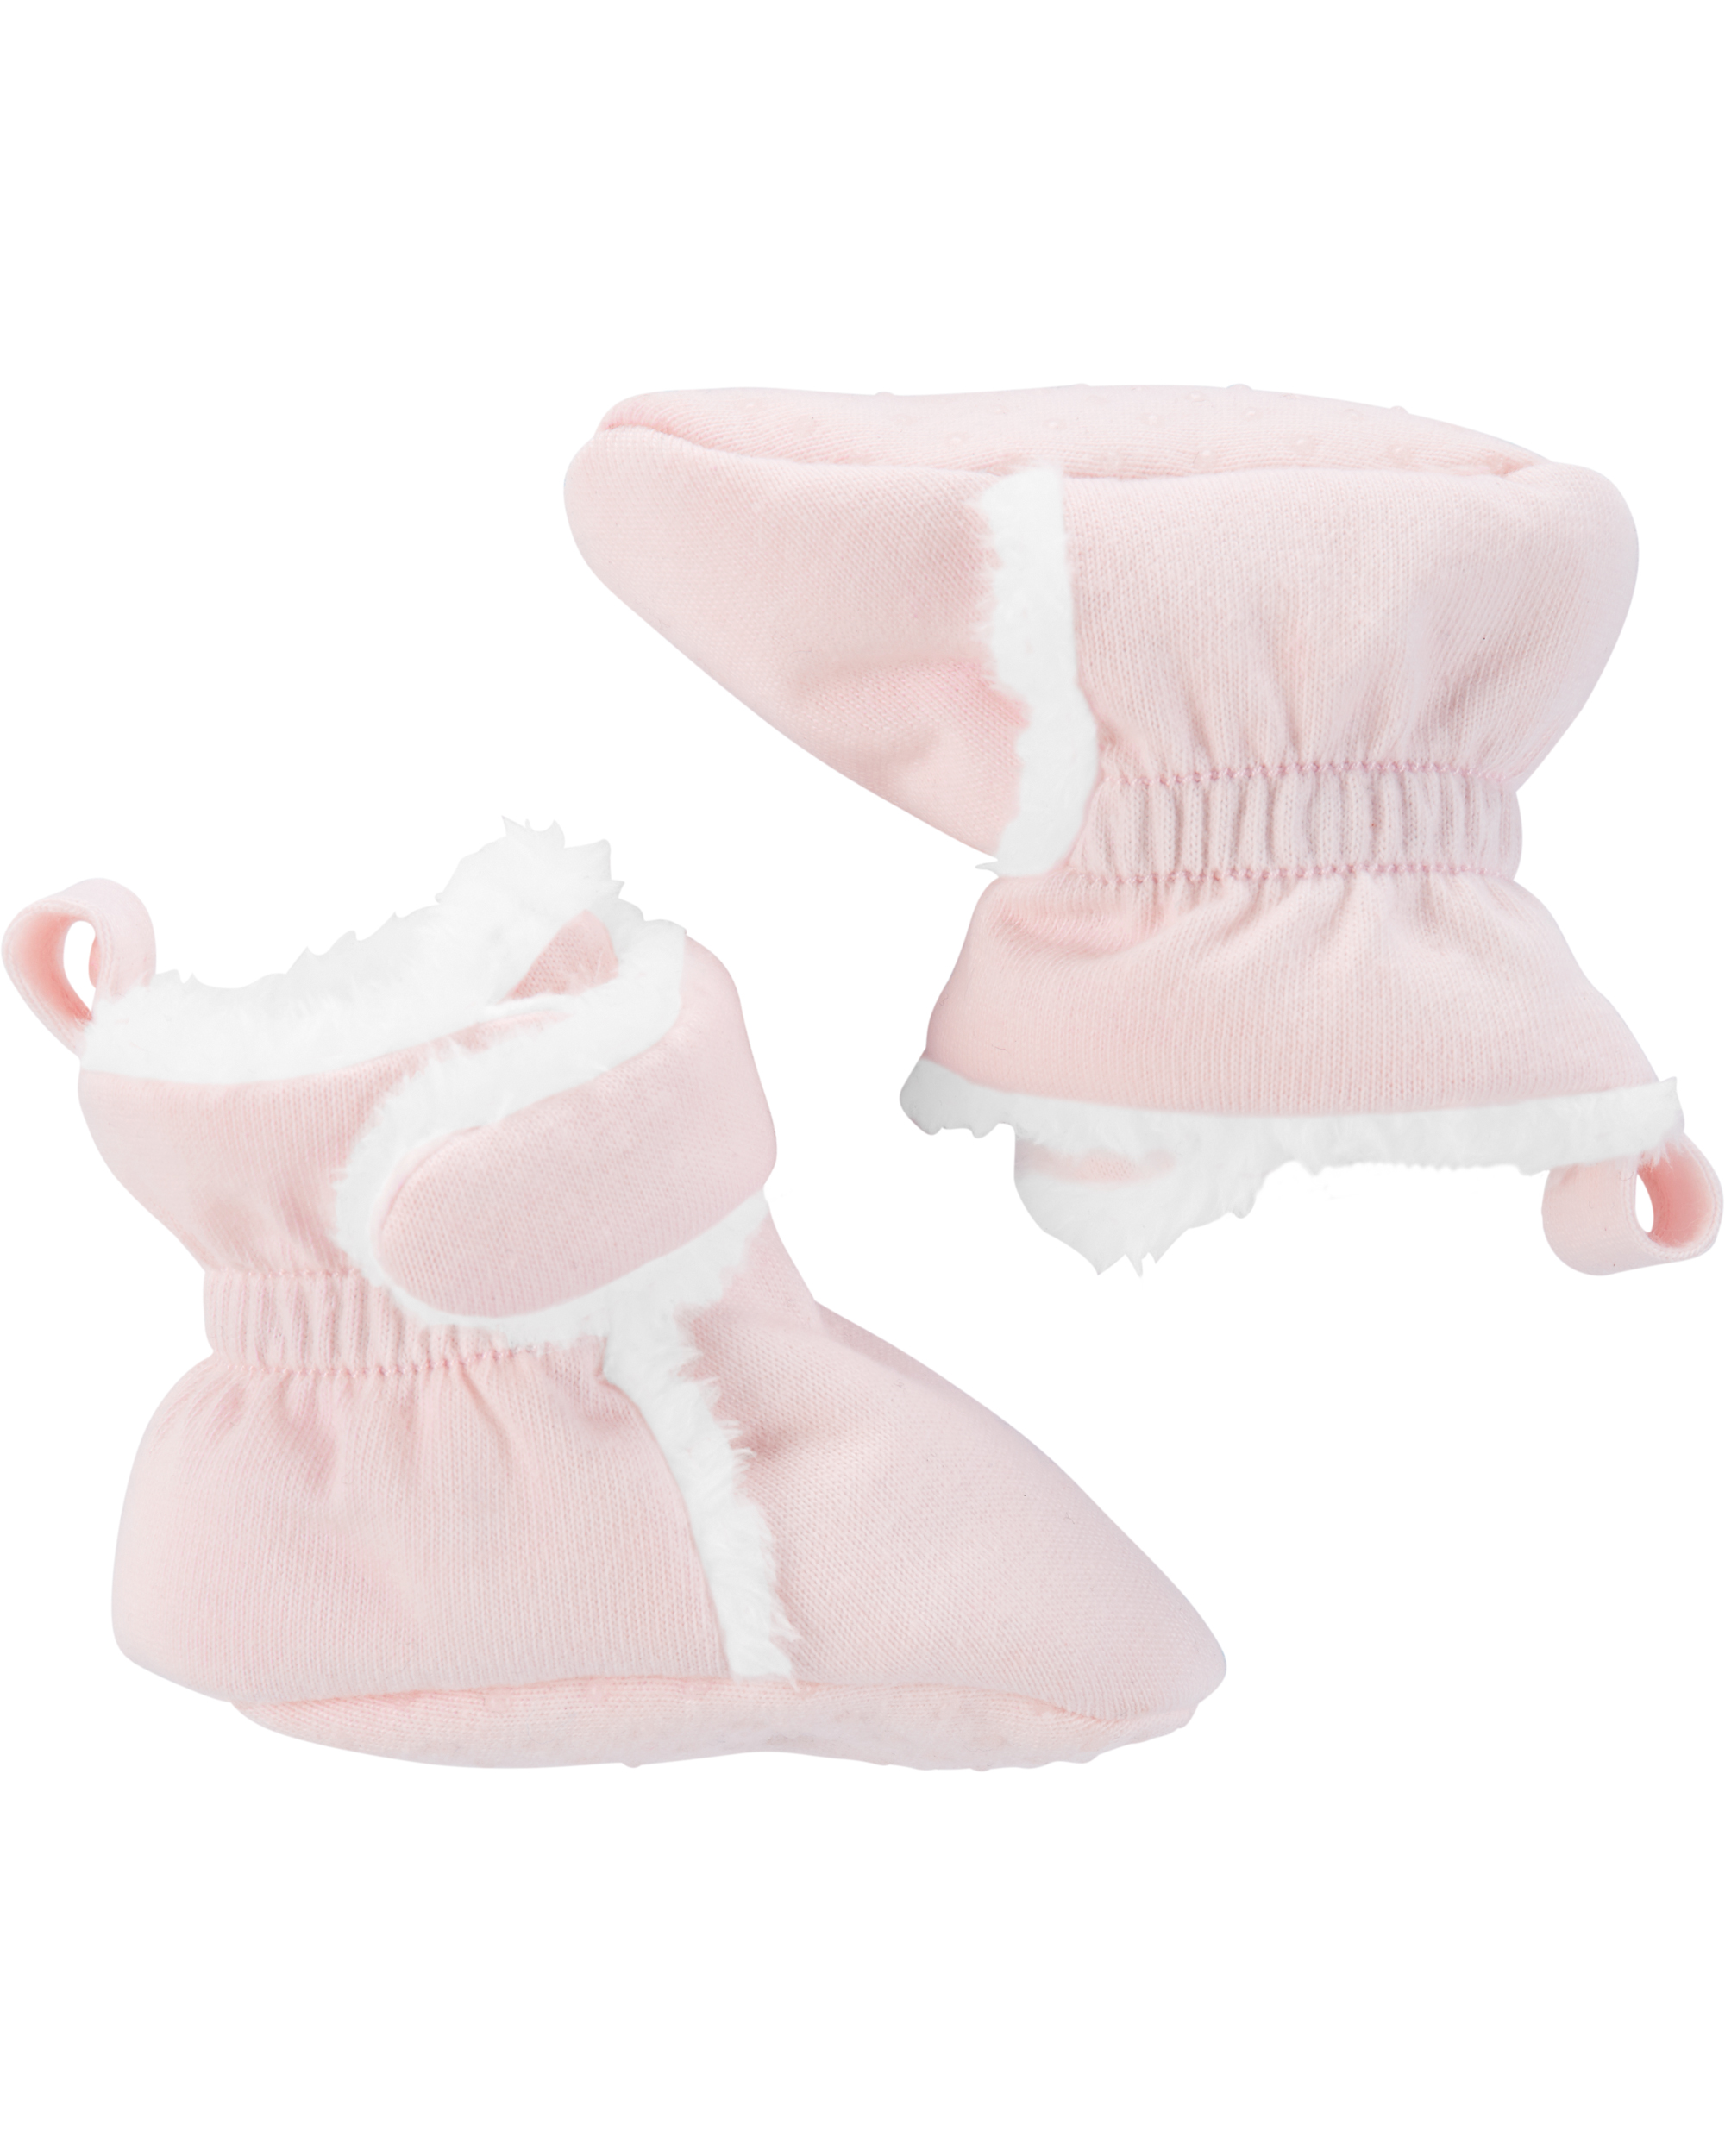 Baby Slippers | carters.com